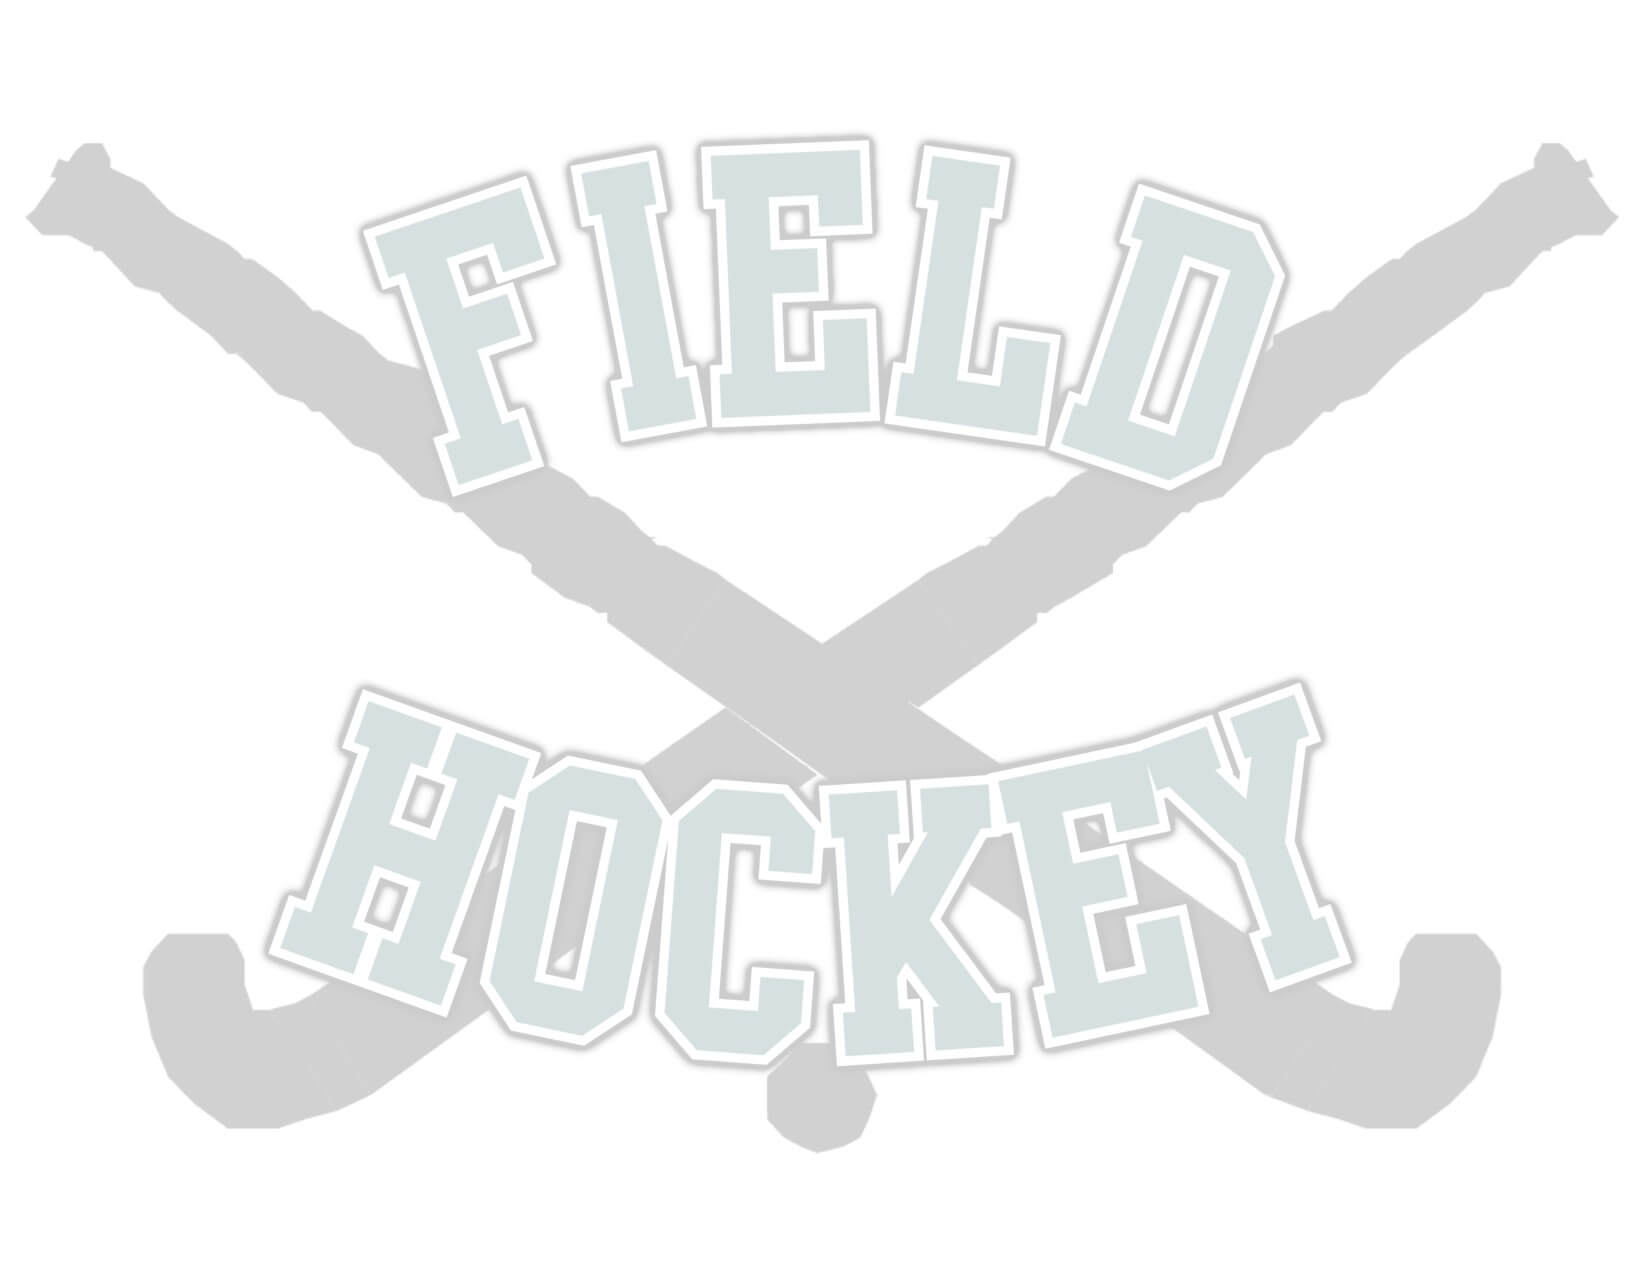 Field Hockey Award Certificate Maker: Make Personalized Awards With Hockey Certificate Templates